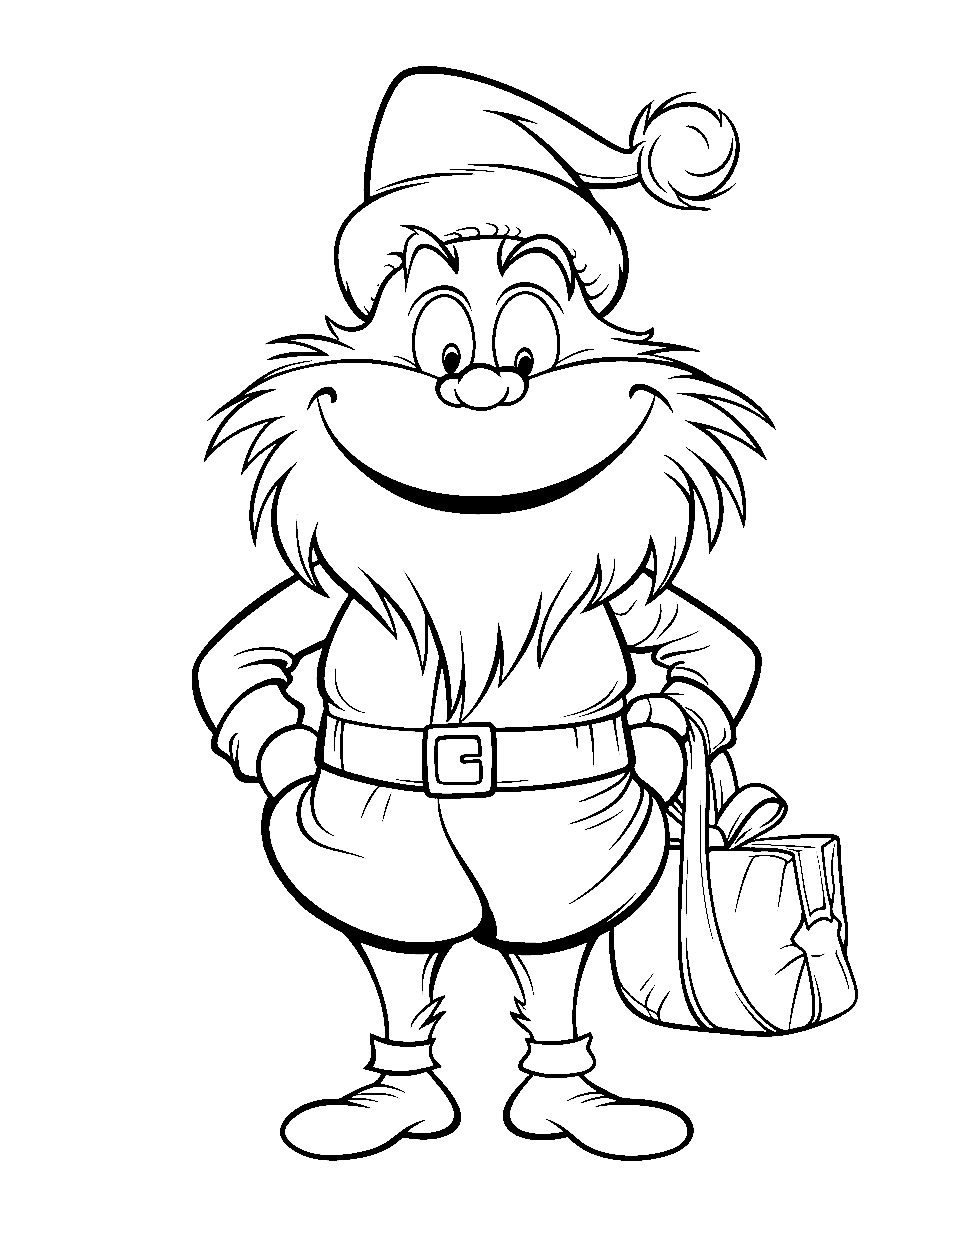 Santa Suit Wearing Coloring Page - The Grinch is wearing a Santa suit with a bag of gifts.